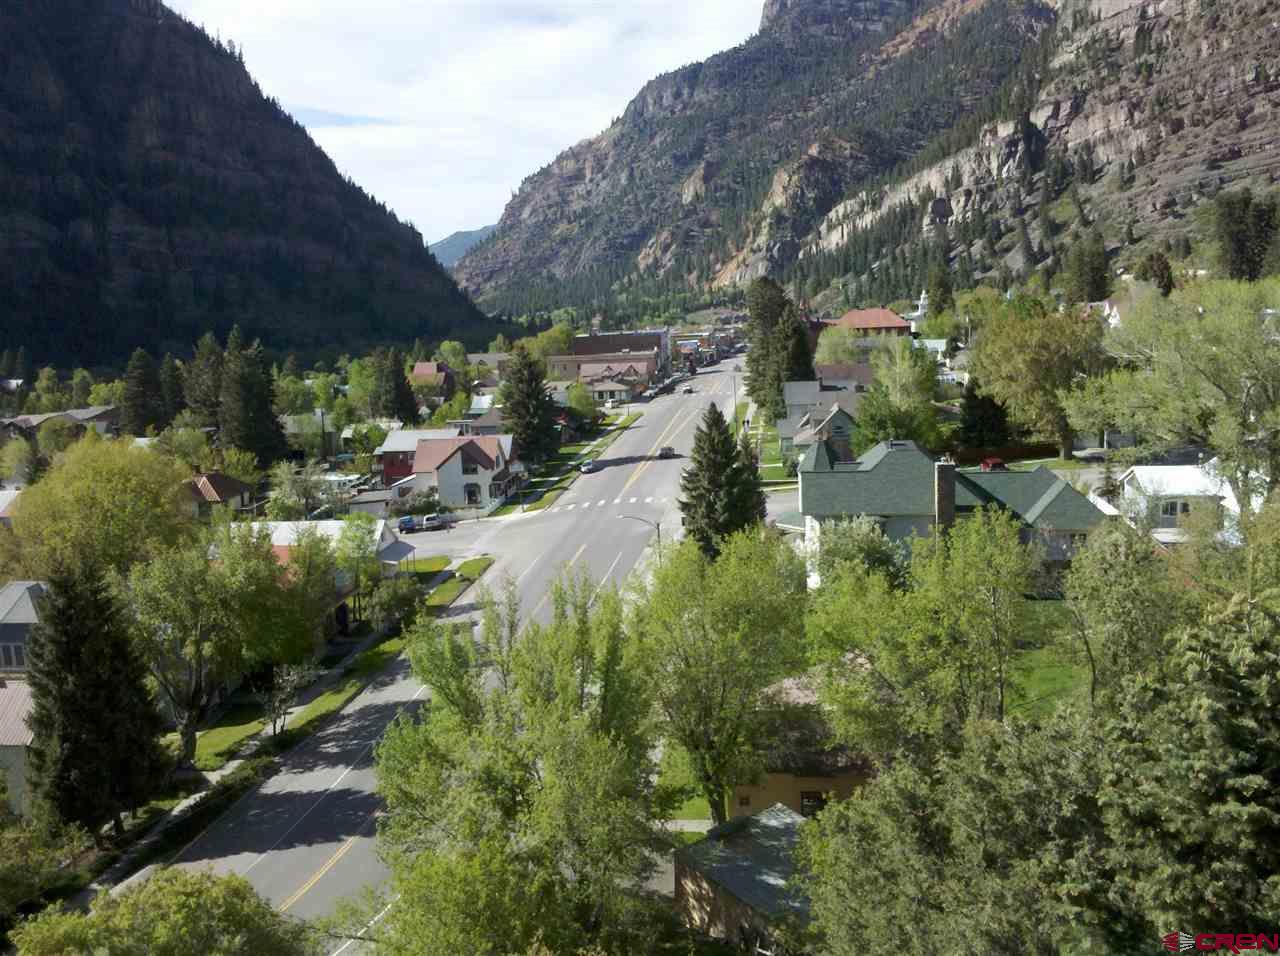 Build your dream home in the Colorado Mountains in Ouray! Phenomenal views over town down main street and up to the Amphitheater, Twin Peaks, and the surroundings. Lot is ready to go with all utilities. High speed fiber being installed in town. Make a change to a better lifestyle in a peaceful mountain town.